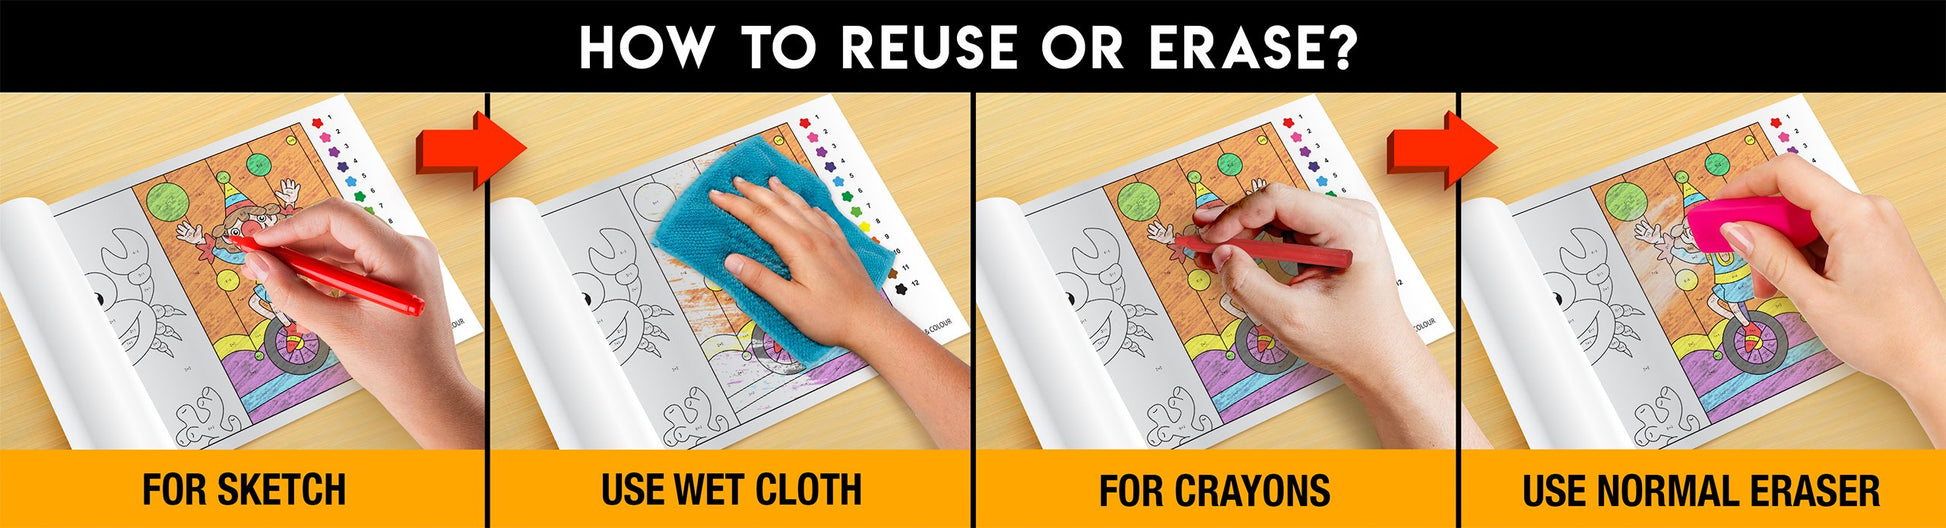 The image has an orange background with four pictures demonstrating how to reuse or erase: the first picture depicts sketching on the numbers sheet, the second shows using a wet cloth to remove sketches, the third image displays crayons coloring on the numbers sheet, and the fourth image illustrates erasing crayons with a regular eraser.